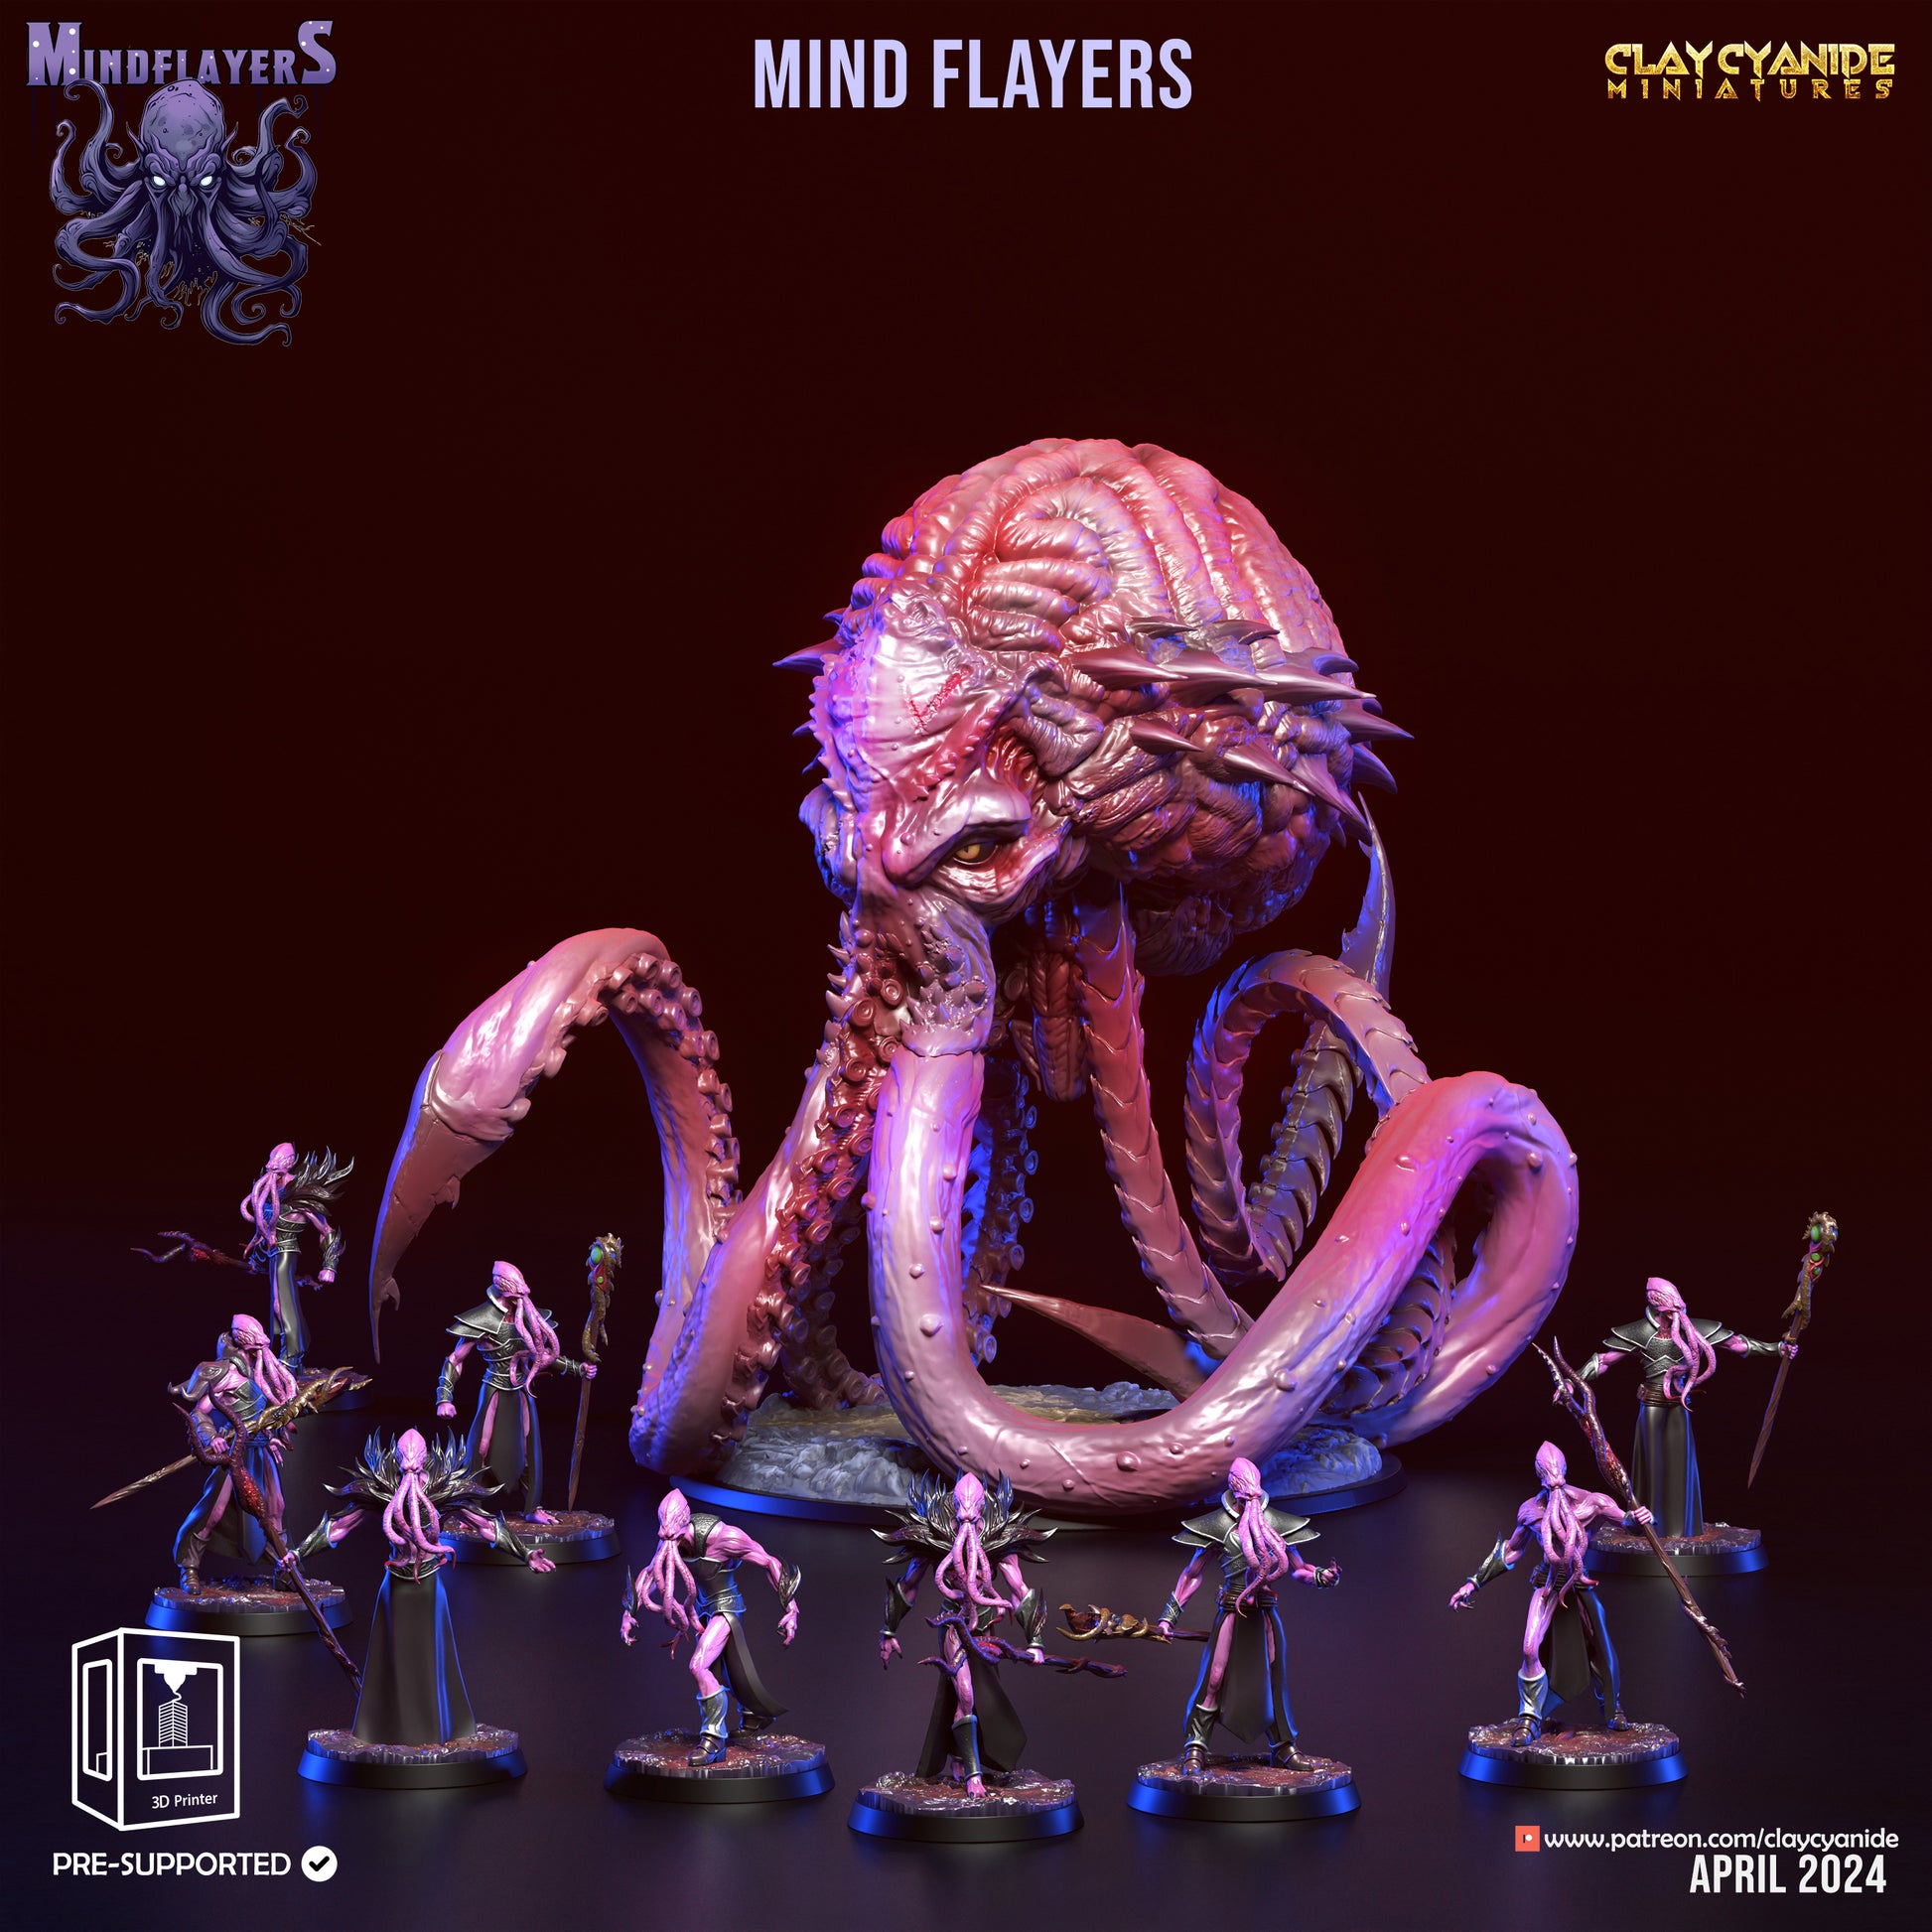 Nar'Shul, Cthulhu-Inspired Mind Flayer Miniature | 32mm Scale - Plague Miniatures